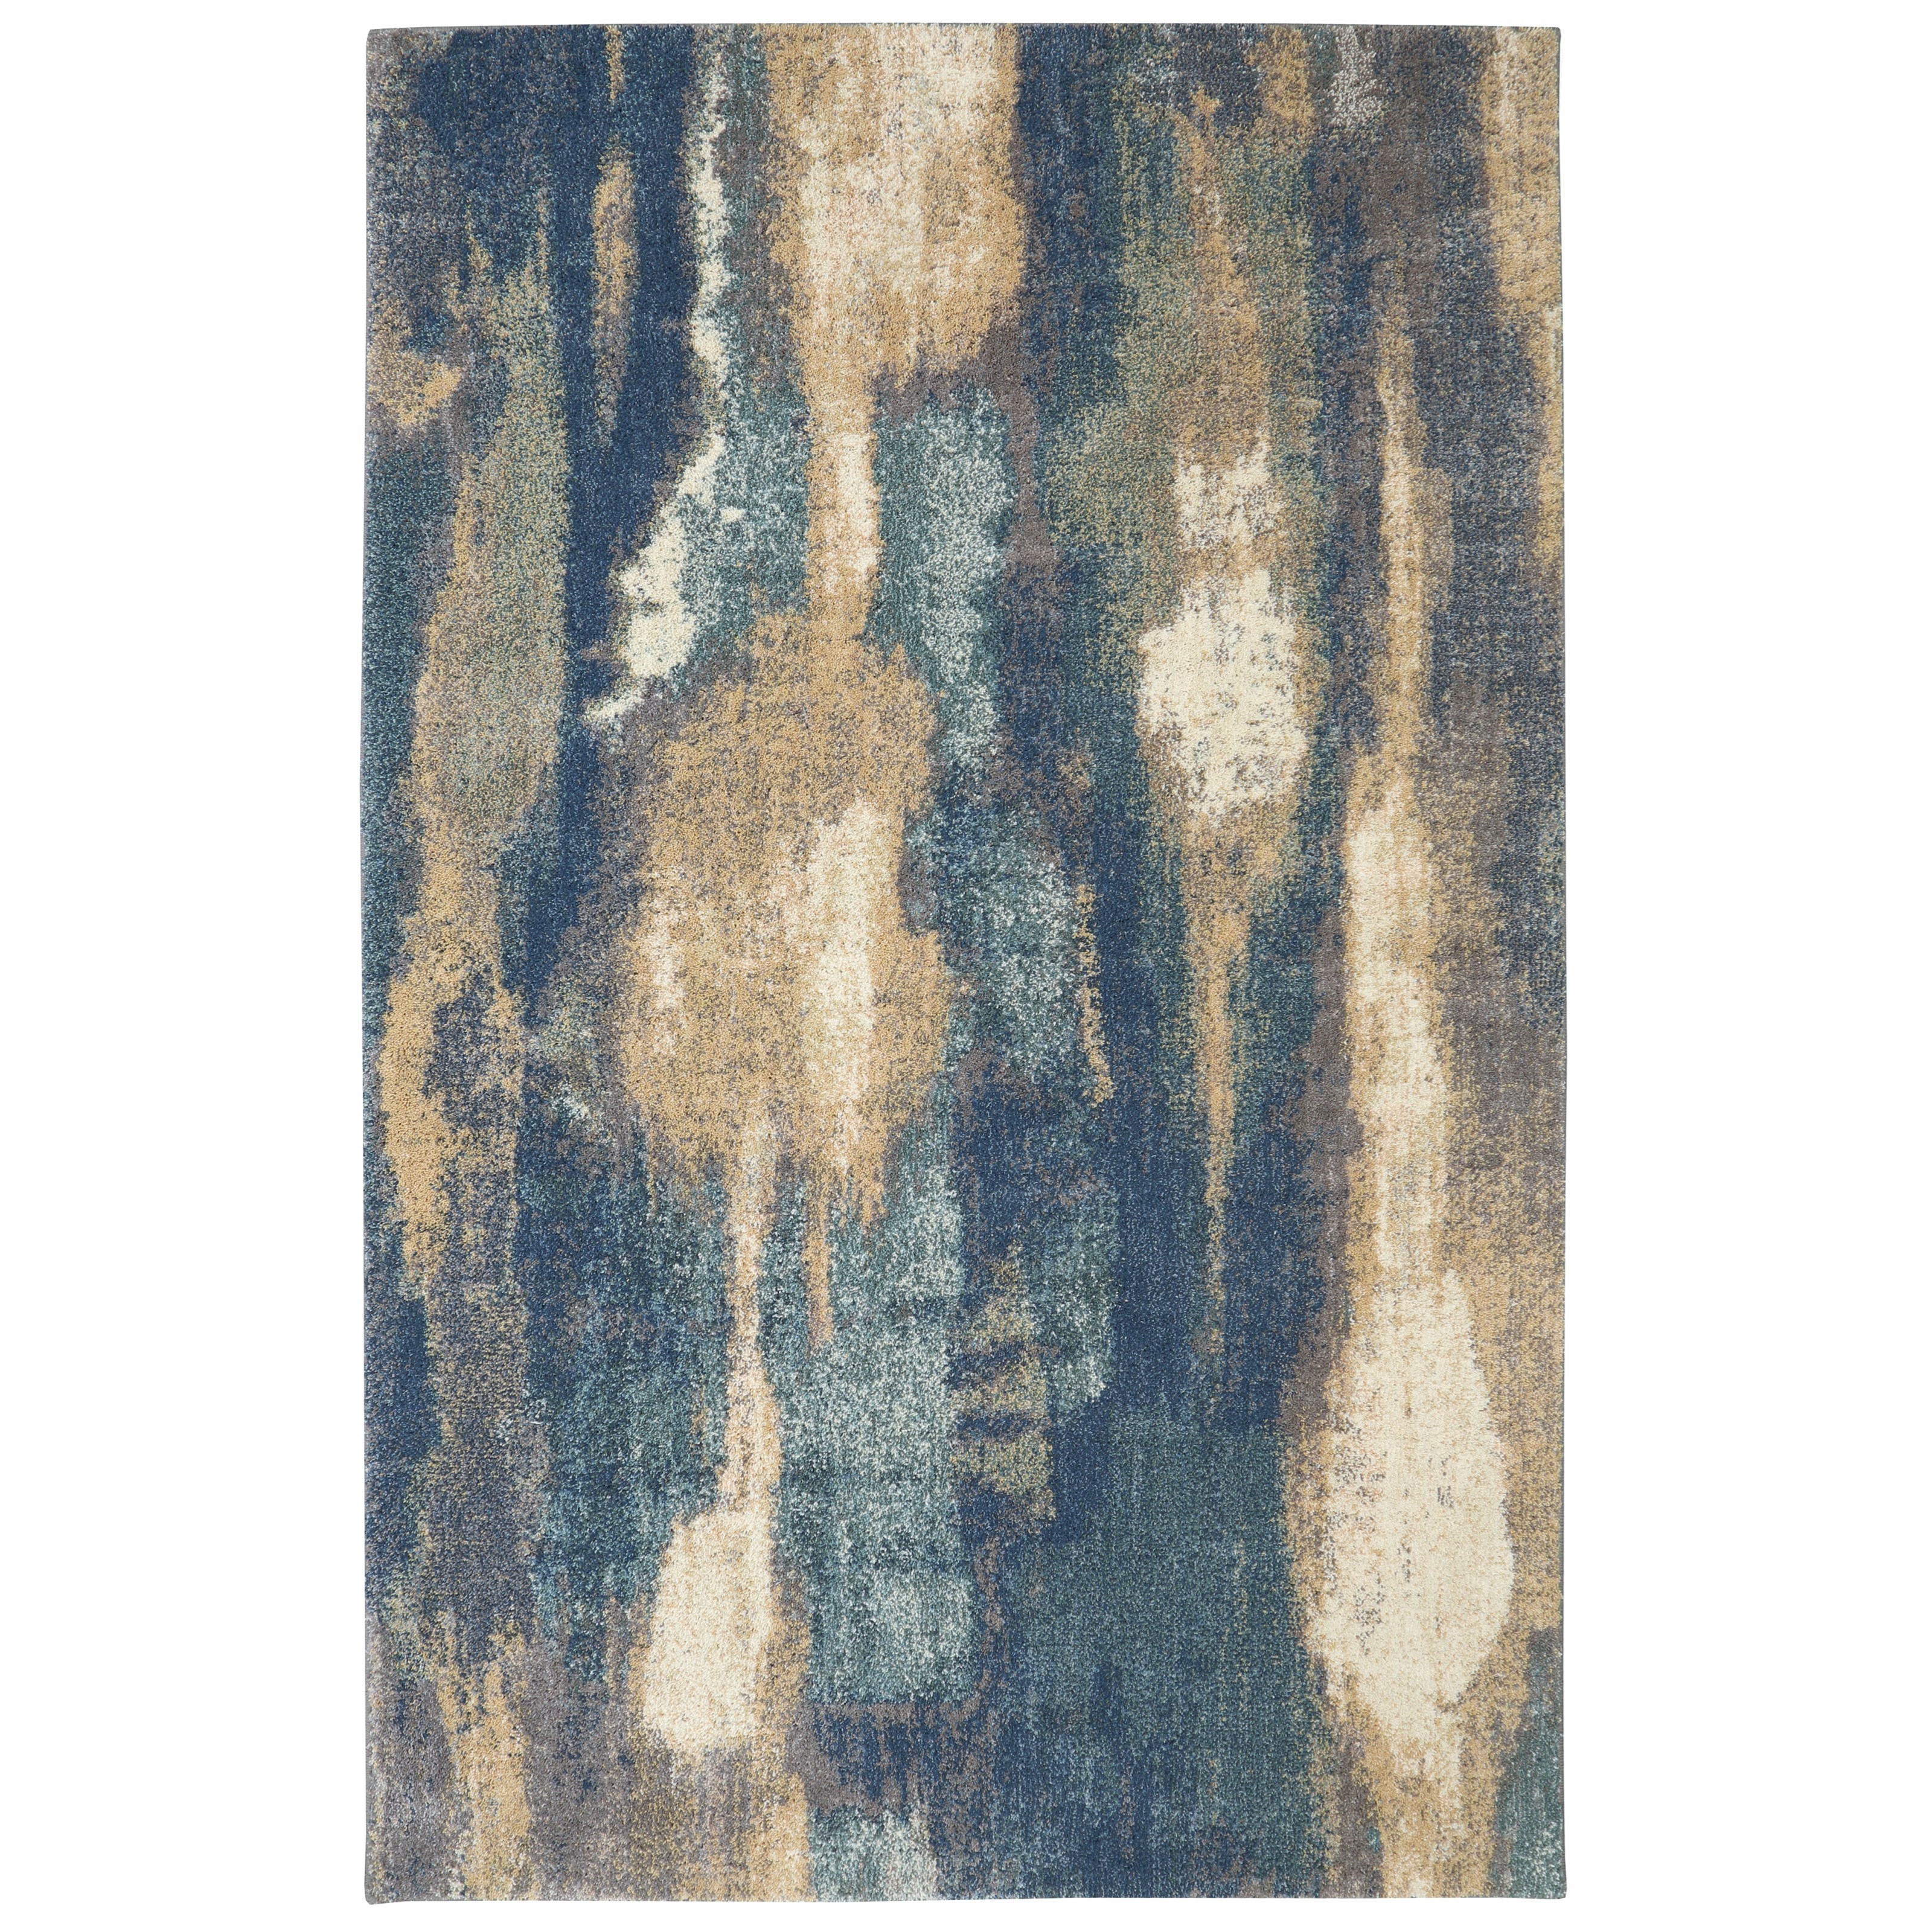 8'x10' Wendall Blue Area Rug